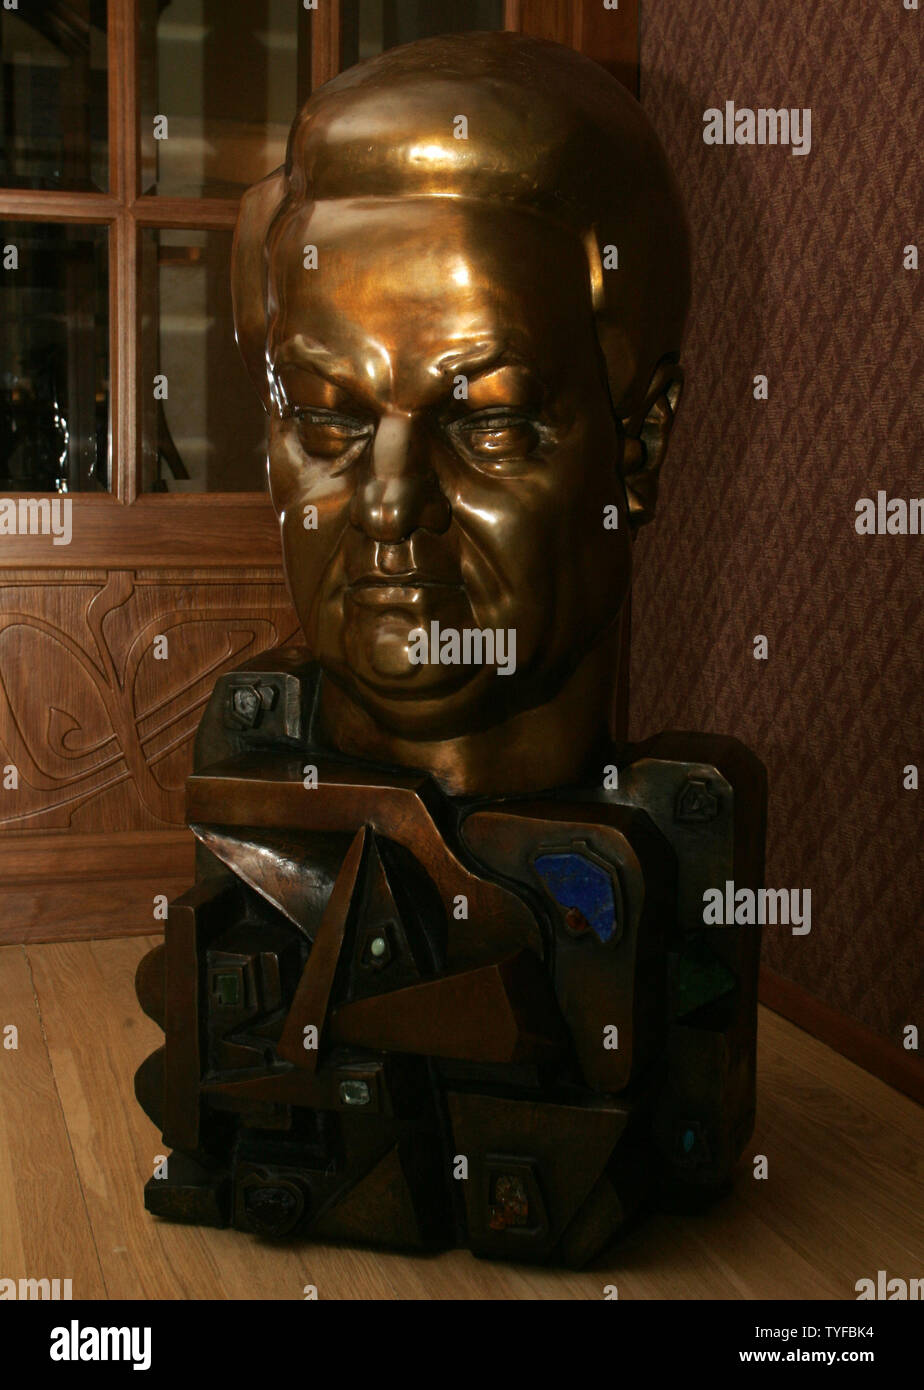 In this file photo, the bust of former President Boris Yeltsin's is on display at his residence in Barvikha, the most presitigious and expensive suburb of Moscow  on January 30, 2006. Yeltsin died at the age of 76 on April 23, 2007 in Moscow. Yeltsin pushed Russia to democracy and a market economy after helping in the collapse of the Soviet Union communist state in 1991. (UPI Photo/Anatoli Zhdanov) Stock Photo